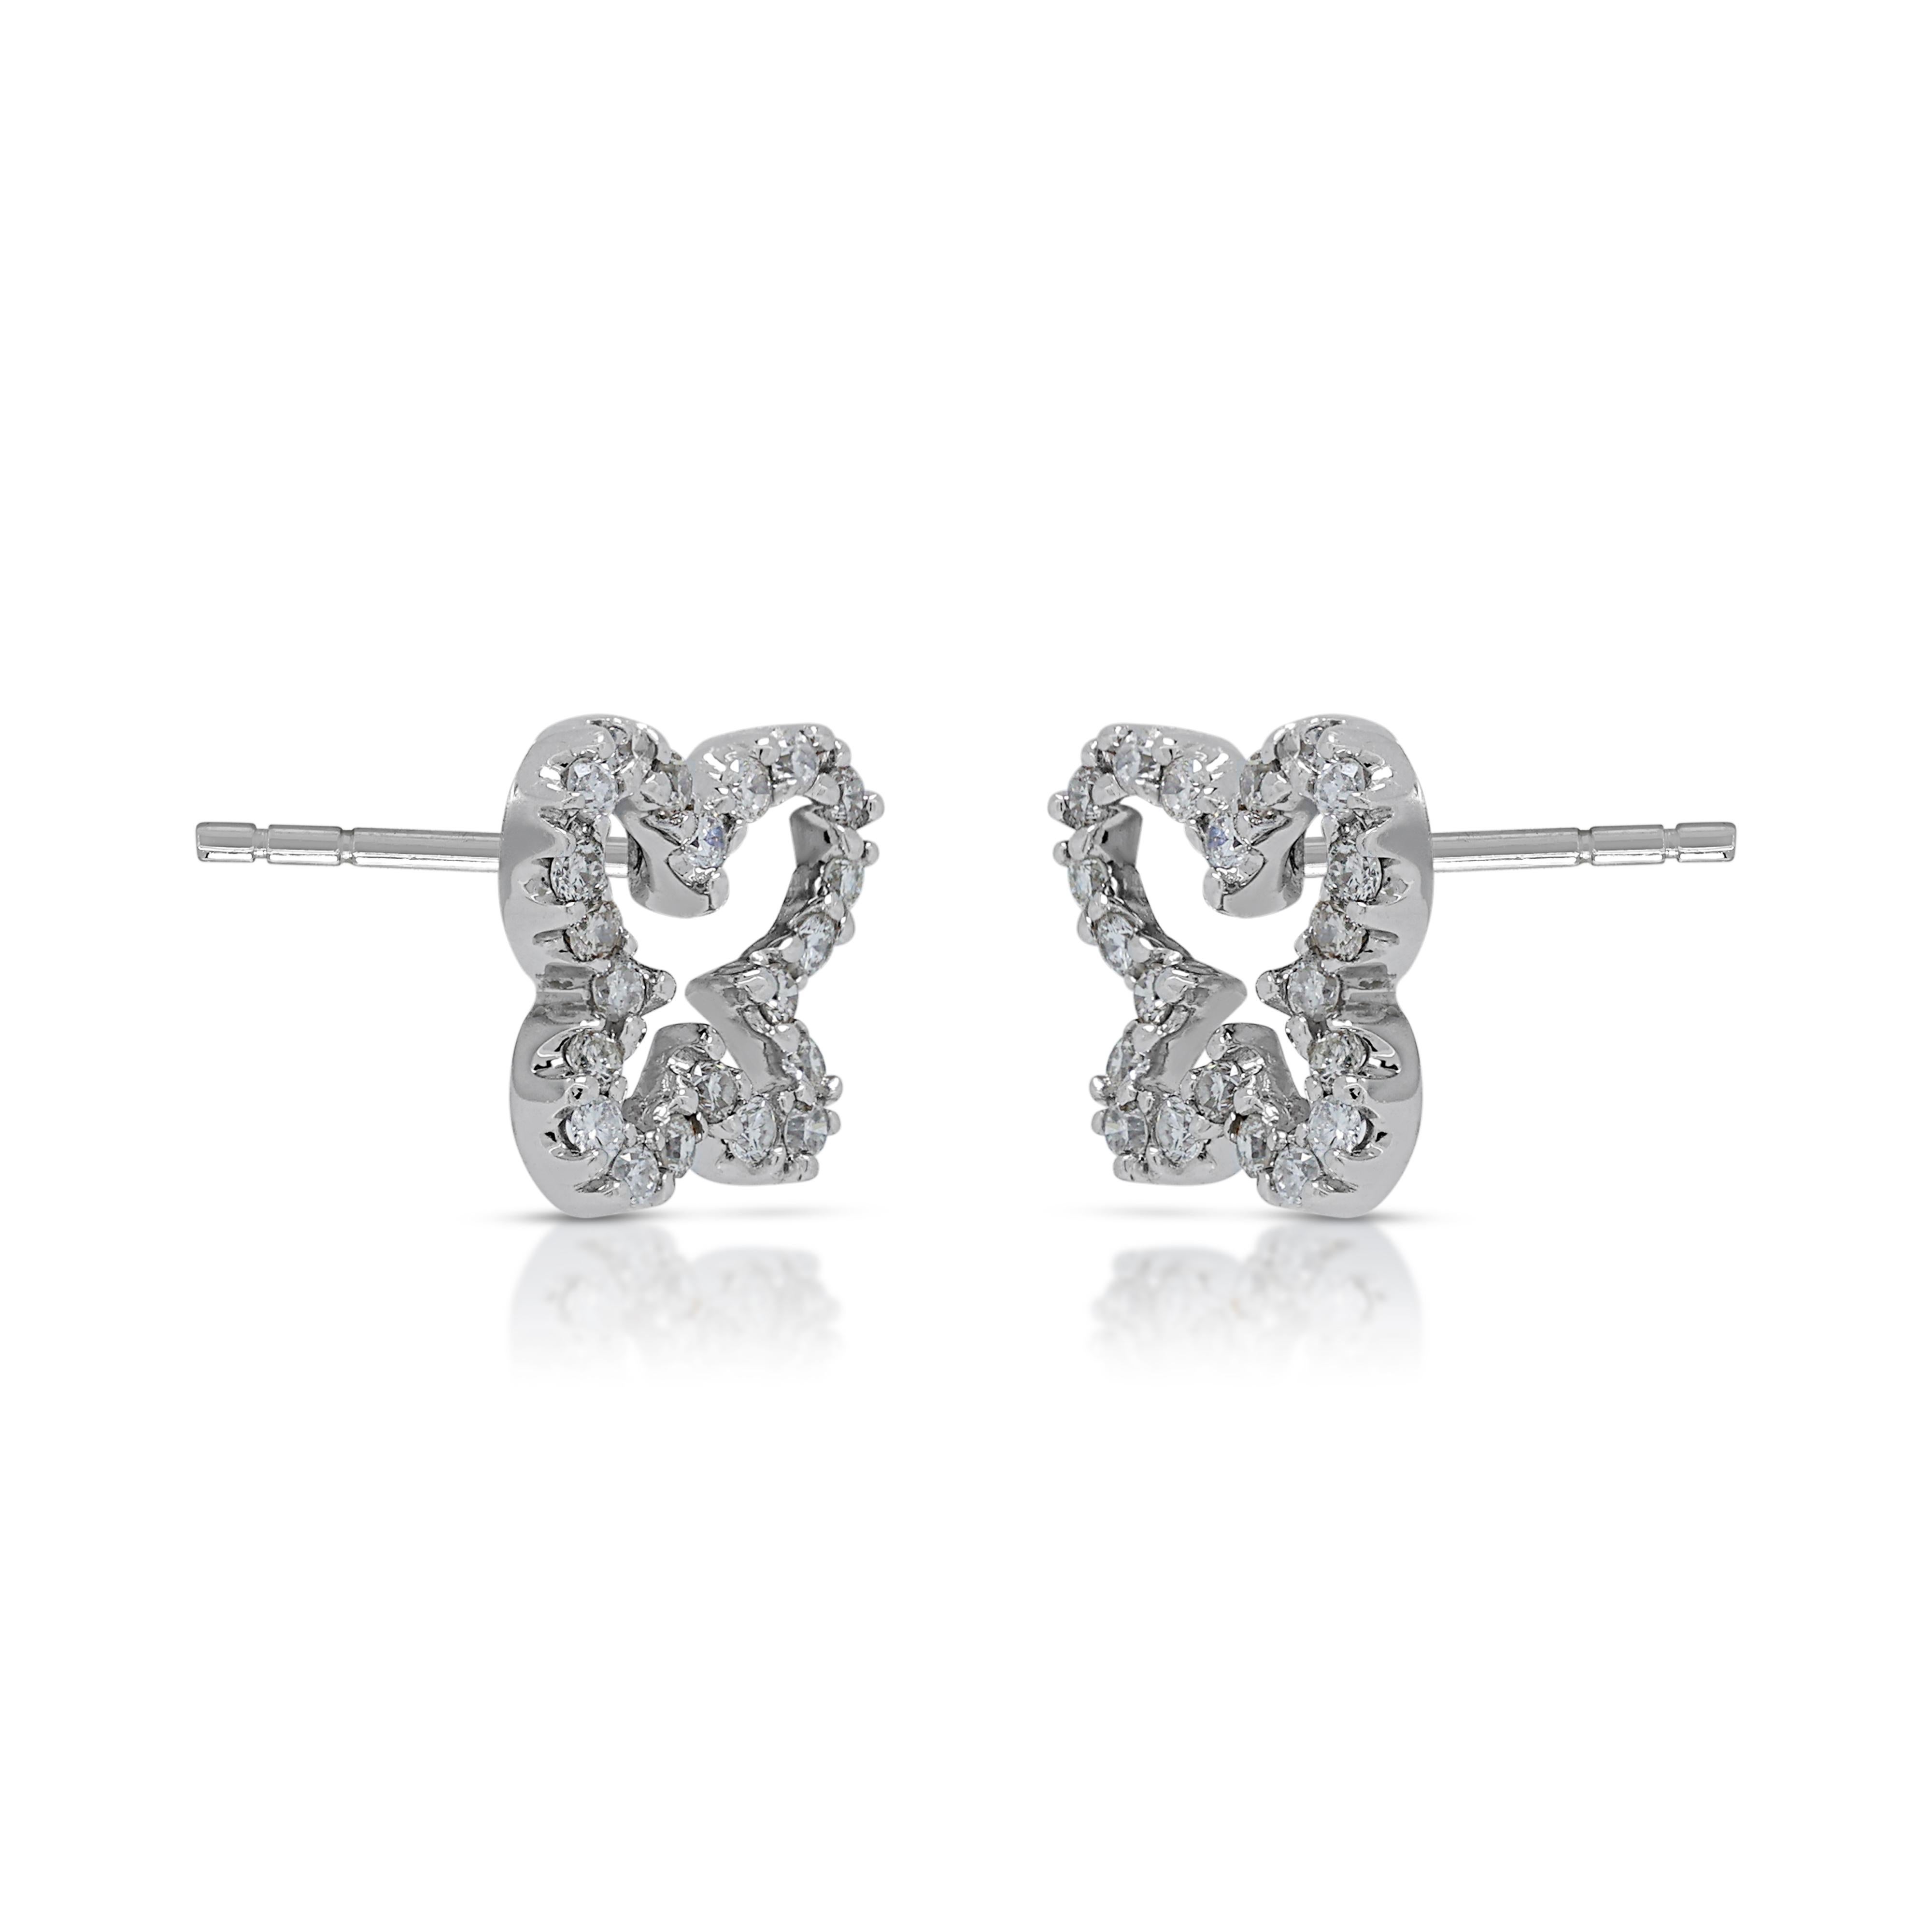 Round Cut Stunning 0.29ct Diamonds Stud Earrings in 18K White Gold For Sale